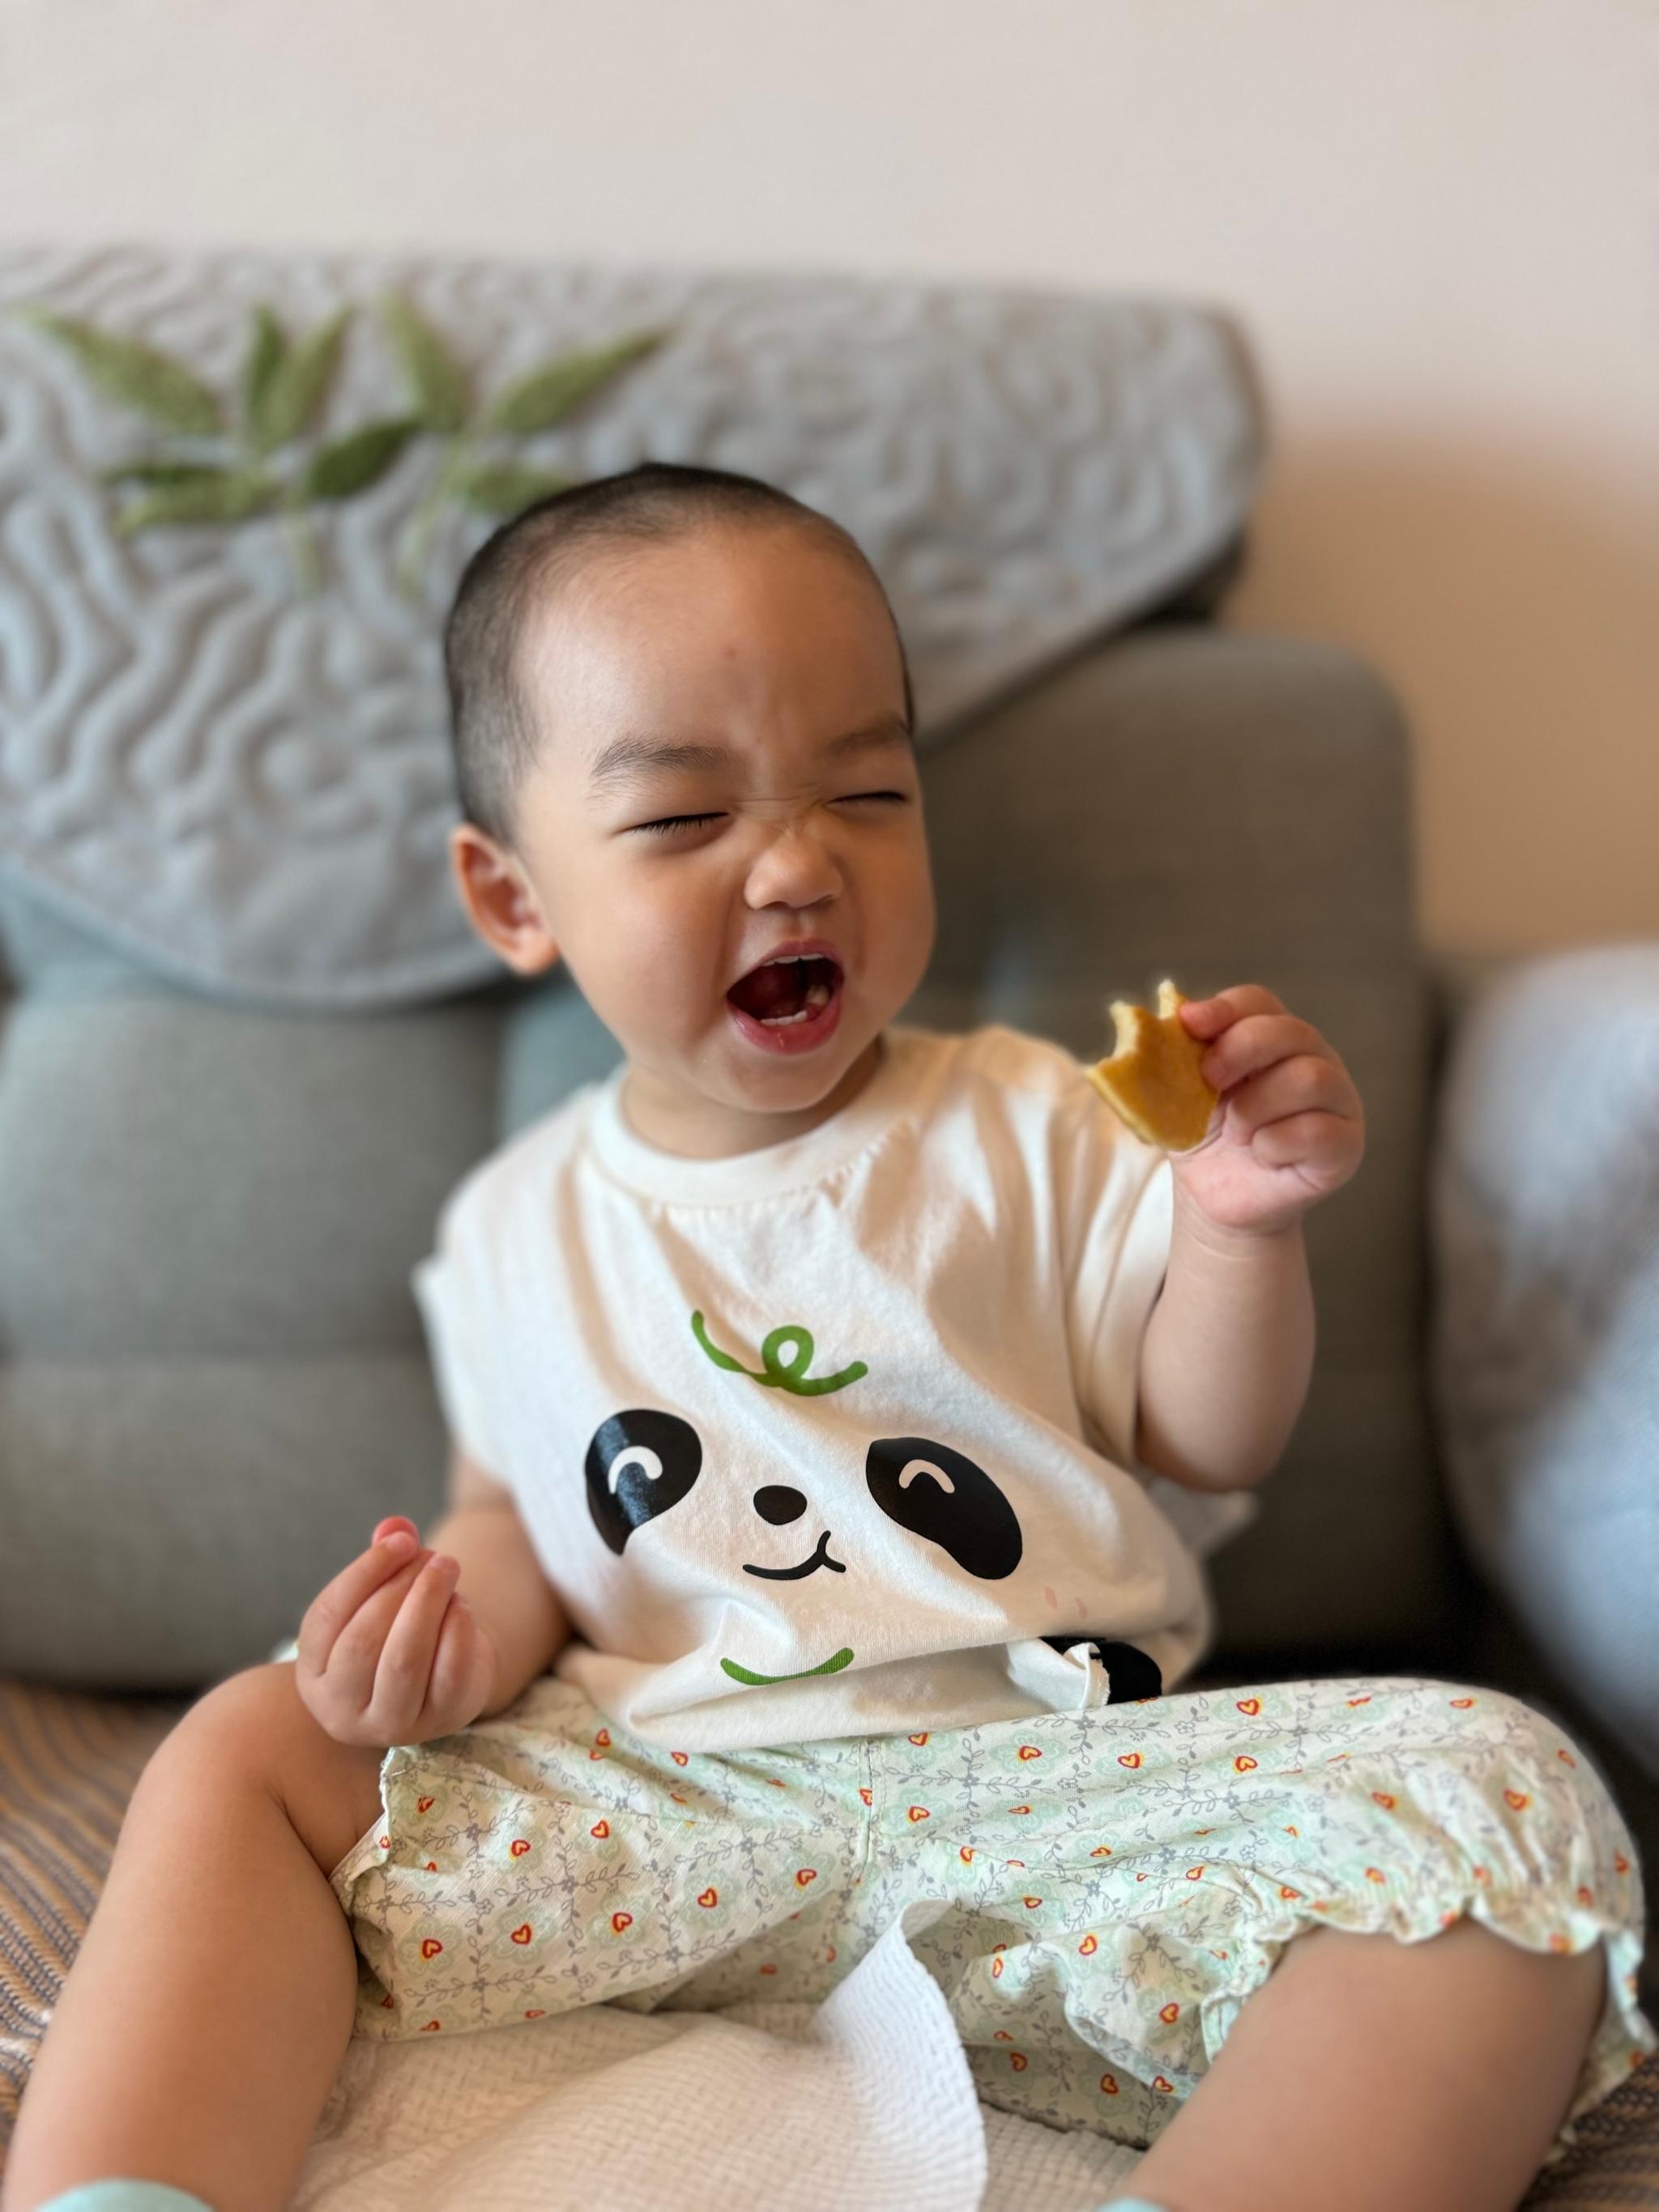 A laughing toddler with a piece of food in hand, wearing a panda-themed outfit, sitting on a couch